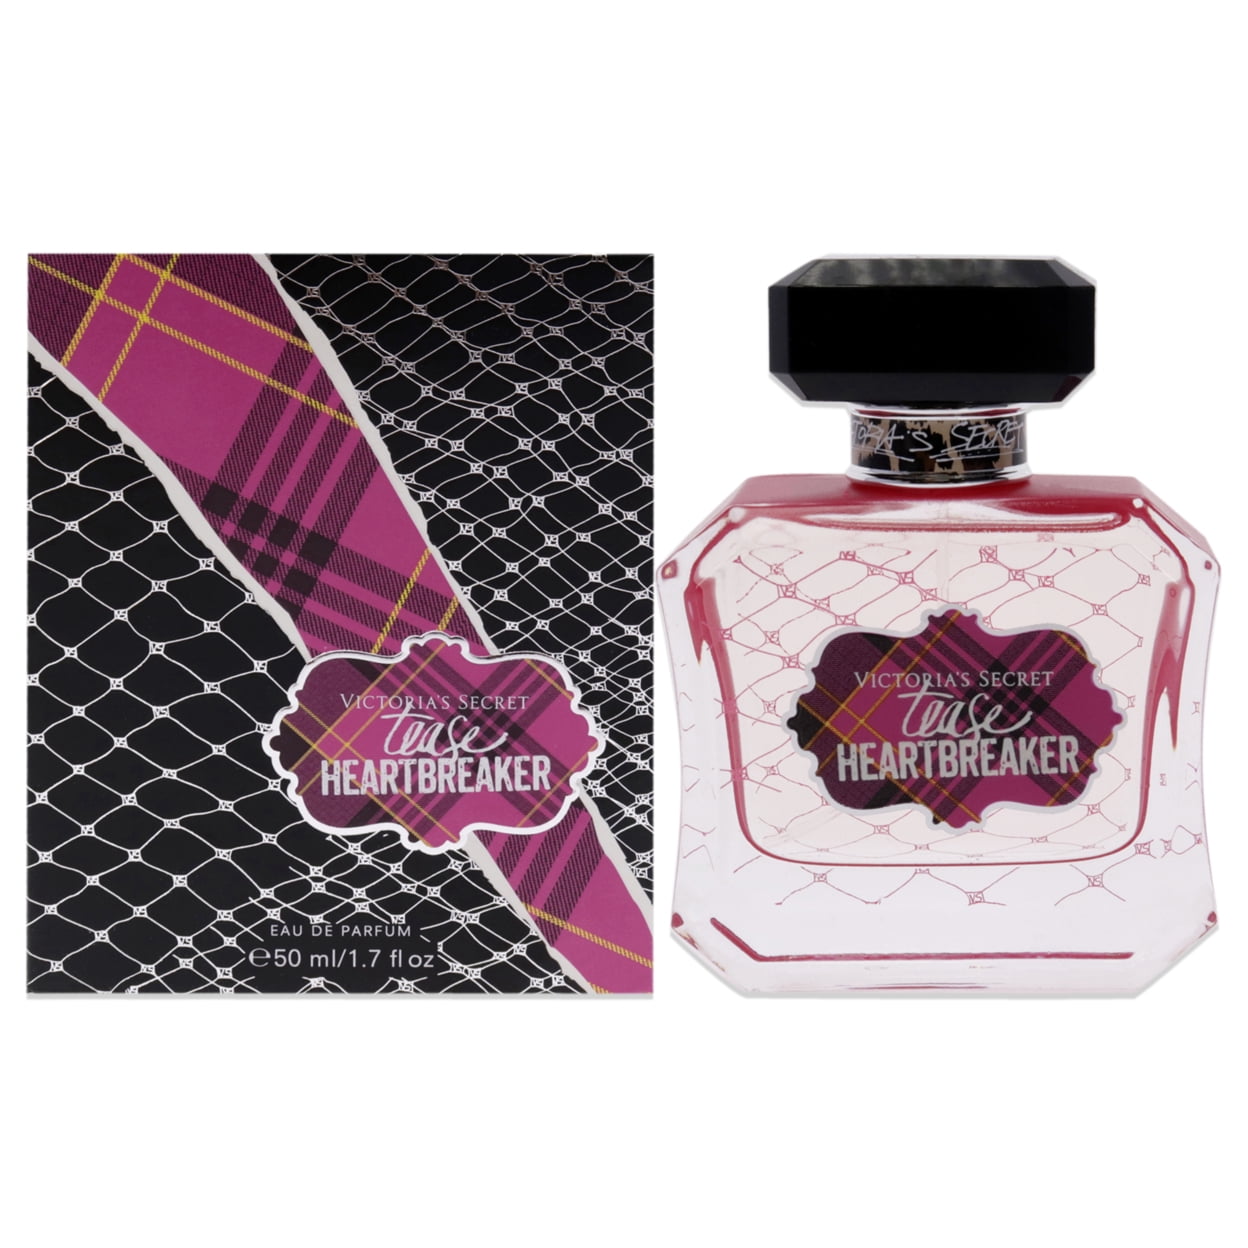 AbsoluteBeauty on Instagram: Amber Romance by Victoria's Secret is a Amber  fragrance for women. Top note is Sour Cherry; middle note is Custard; base  notes are Vanilla and Sandalwood. Now available @1800kes